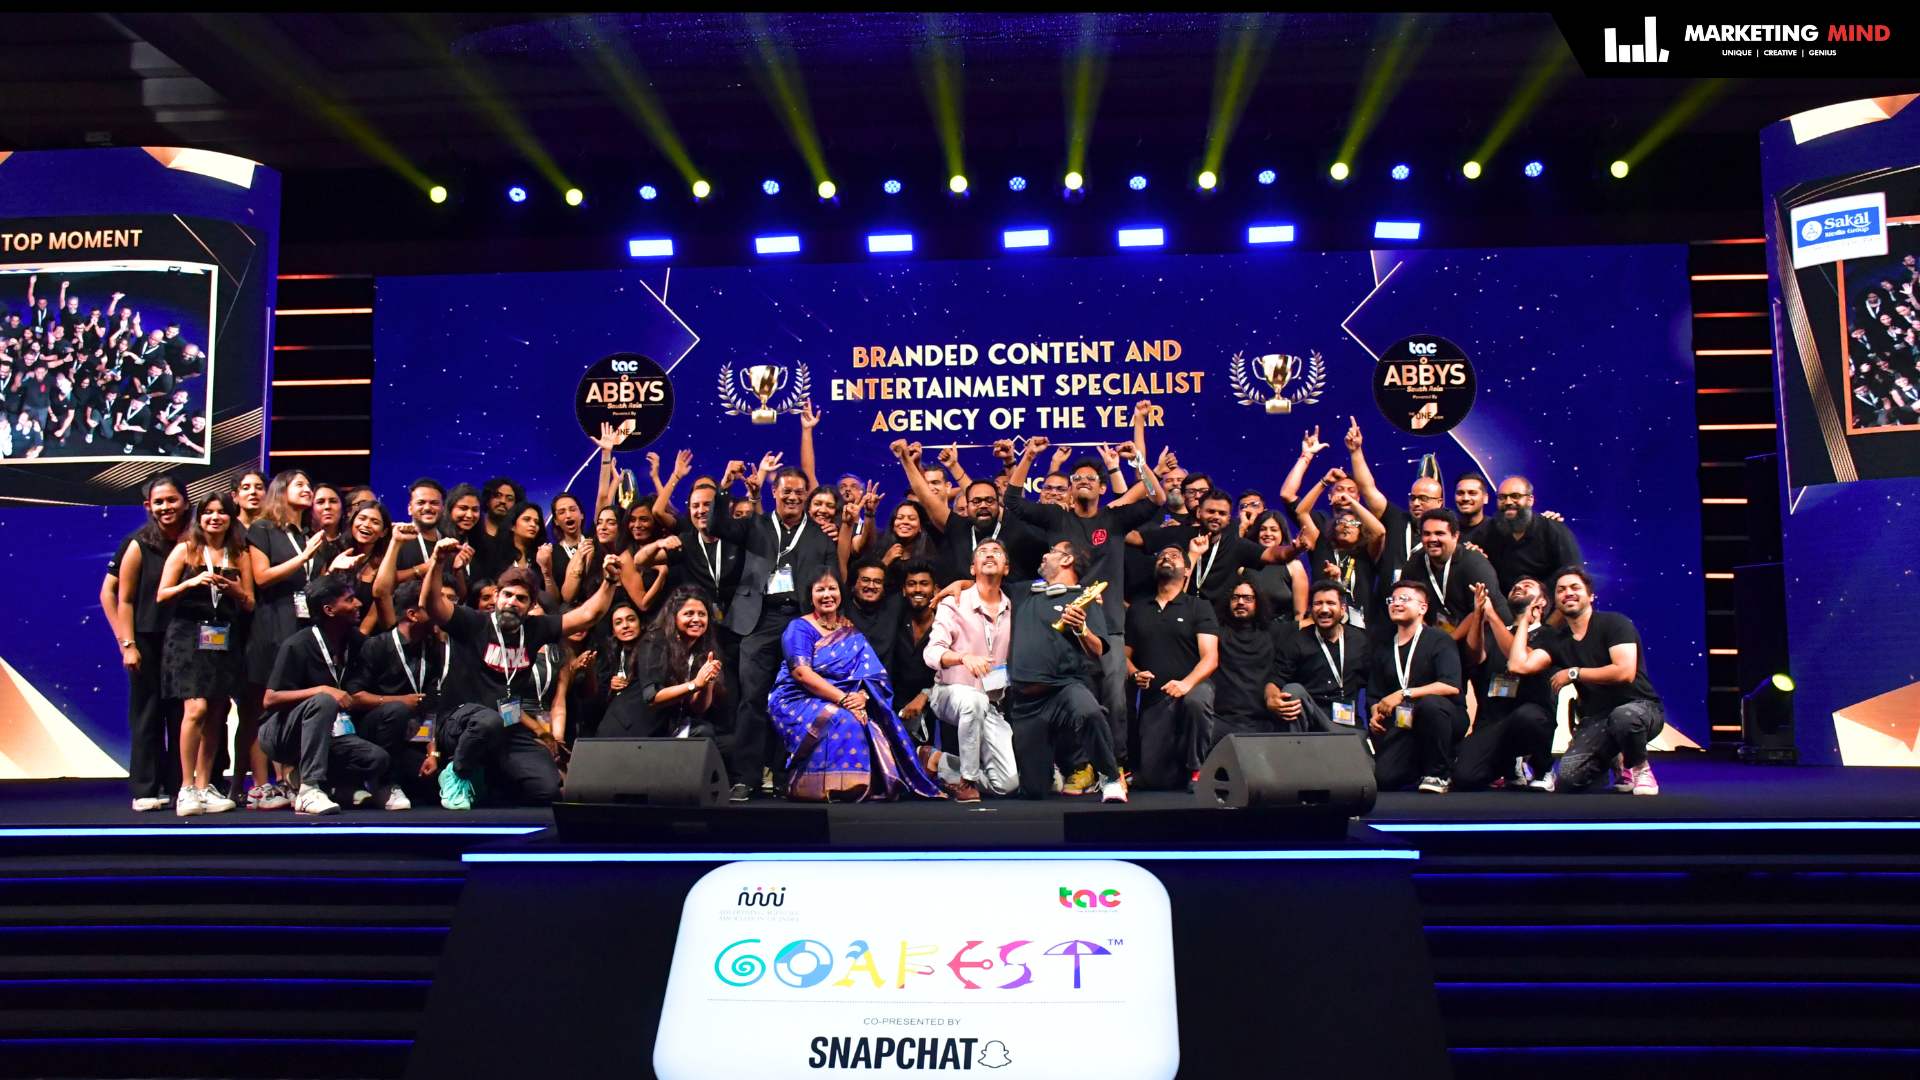 Leo Burnett India - Branded Content and Entertainment Specialist Agency of the Year